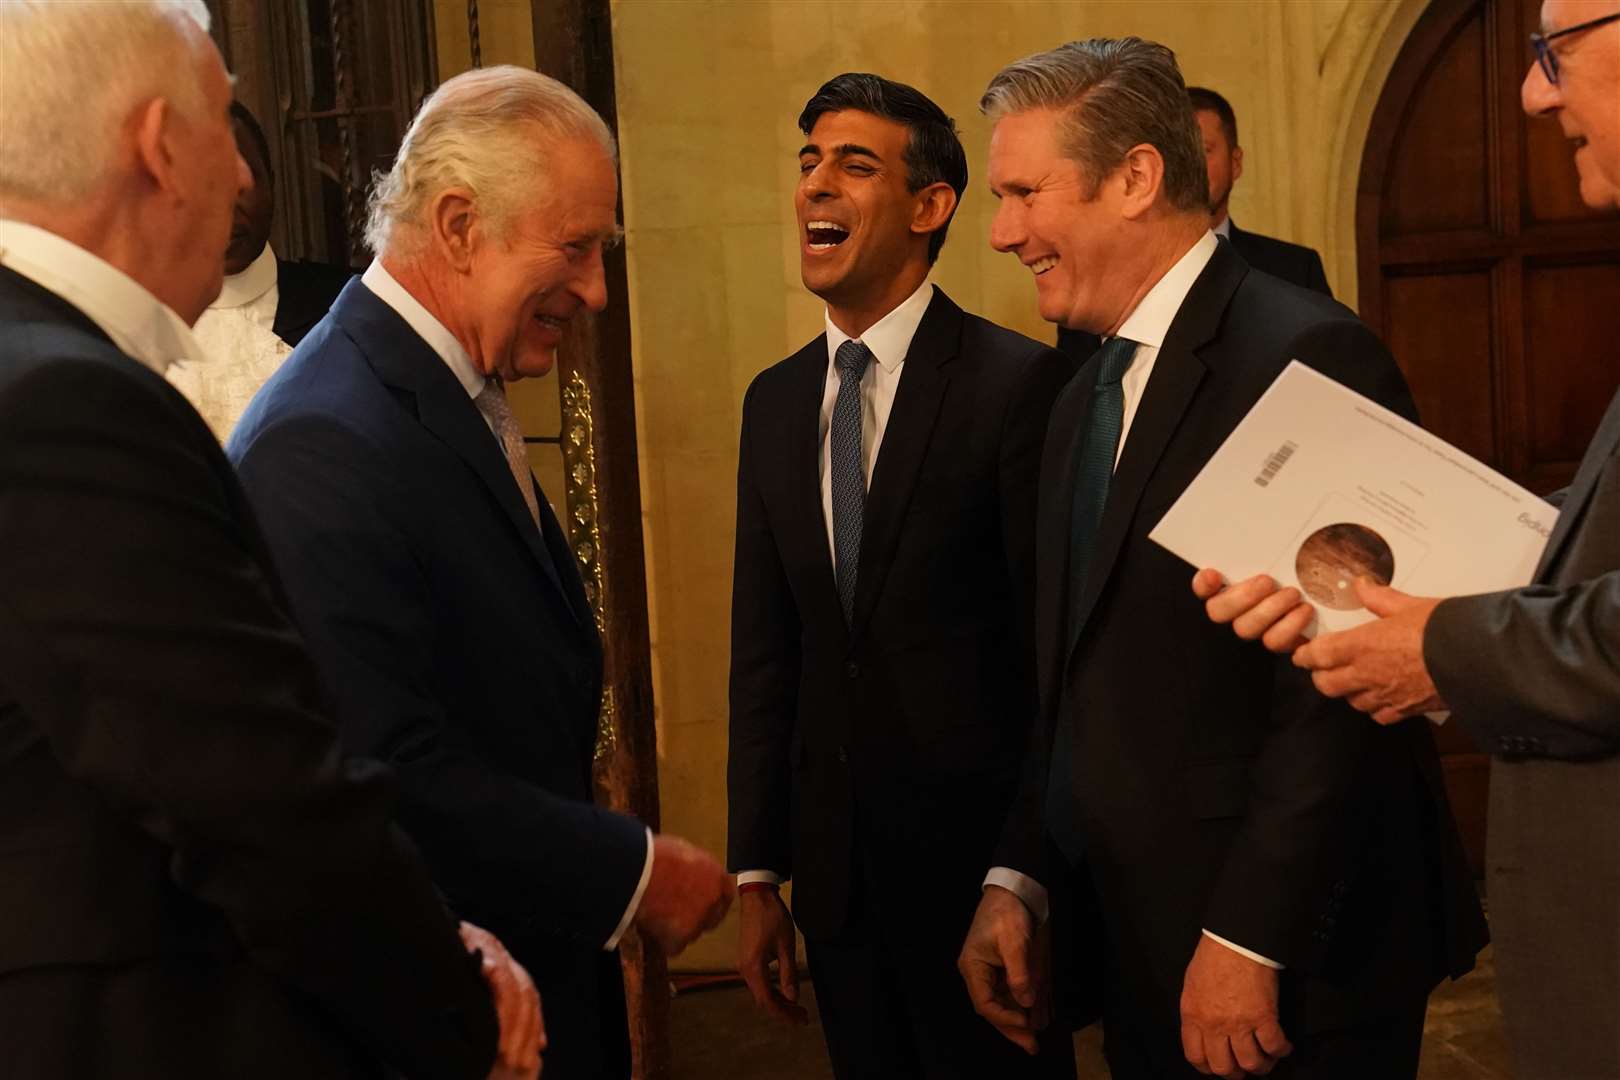 King Charles III speaks with Prime Minister Rishi Sunak and Labour leader Sir Keir Starmer at a coronation reception in Westminster Hall (Arthur Edwards/The Sun/PA)